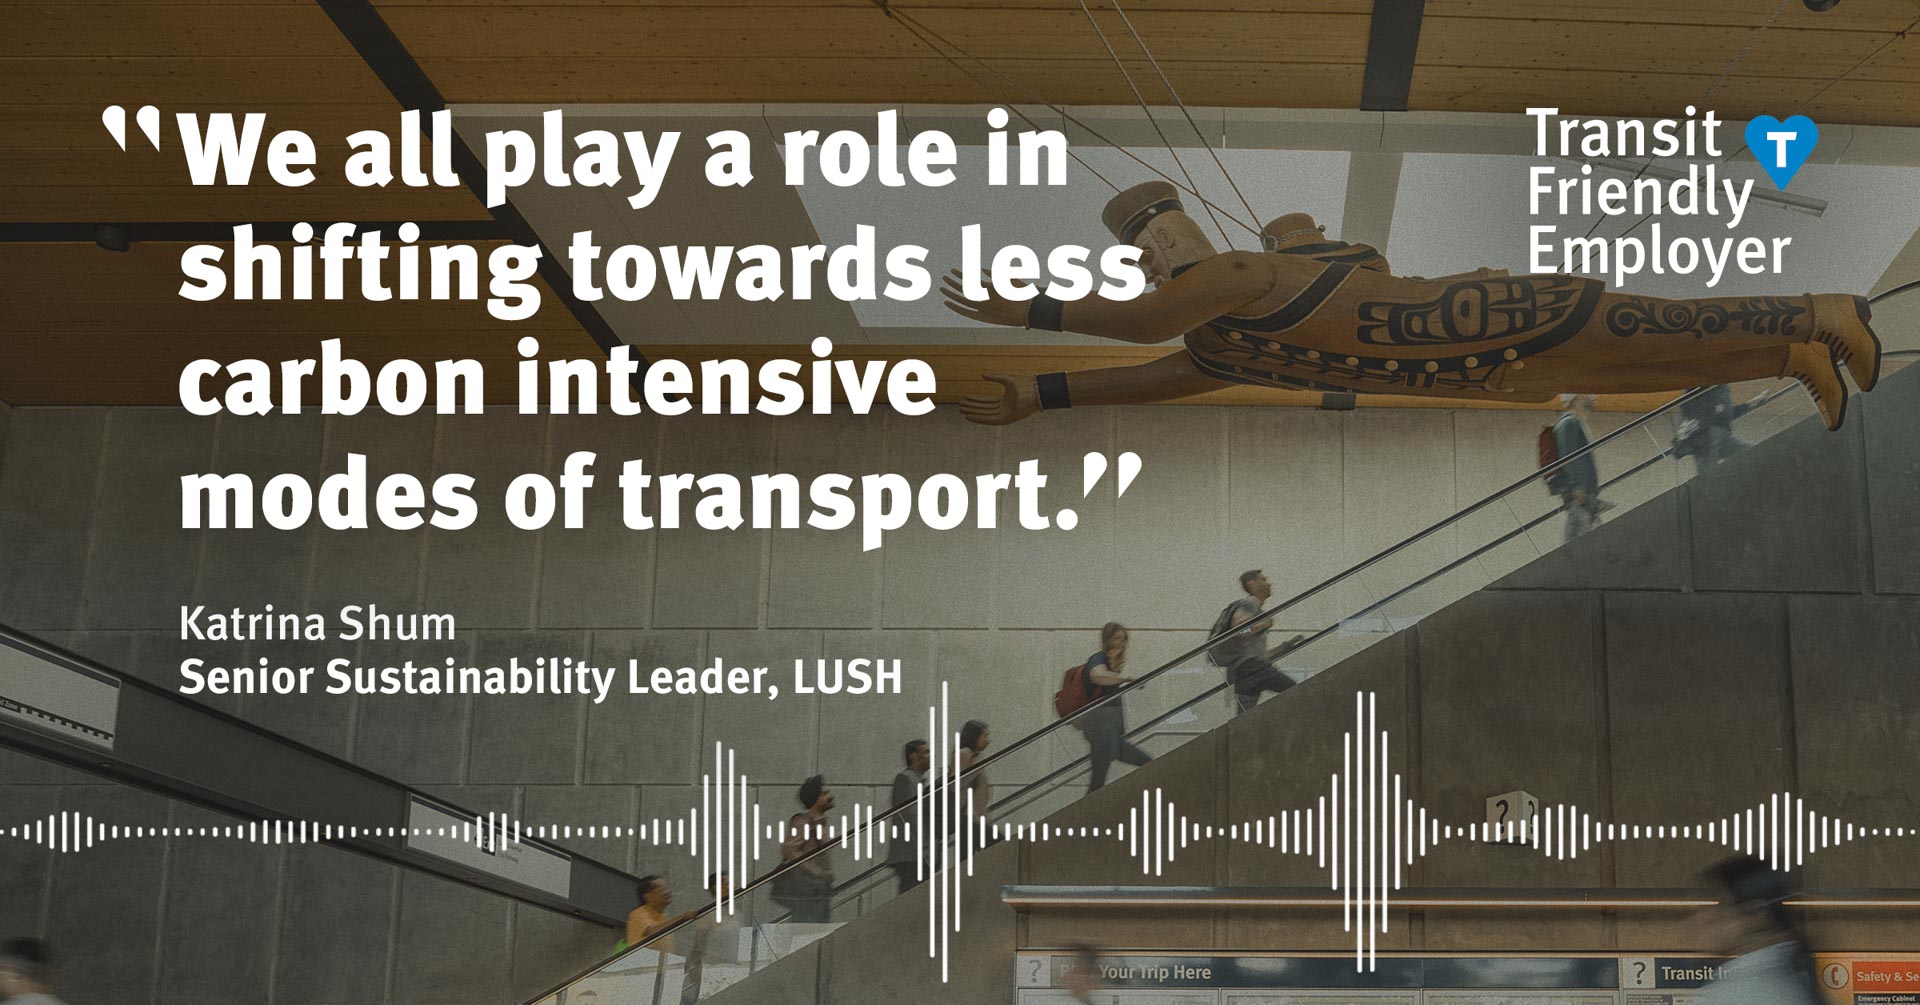 "We all play a role in shifting towards less carbon intensive modes of transport" —Katrina Shum, Senior Sustainability Leader, Lush